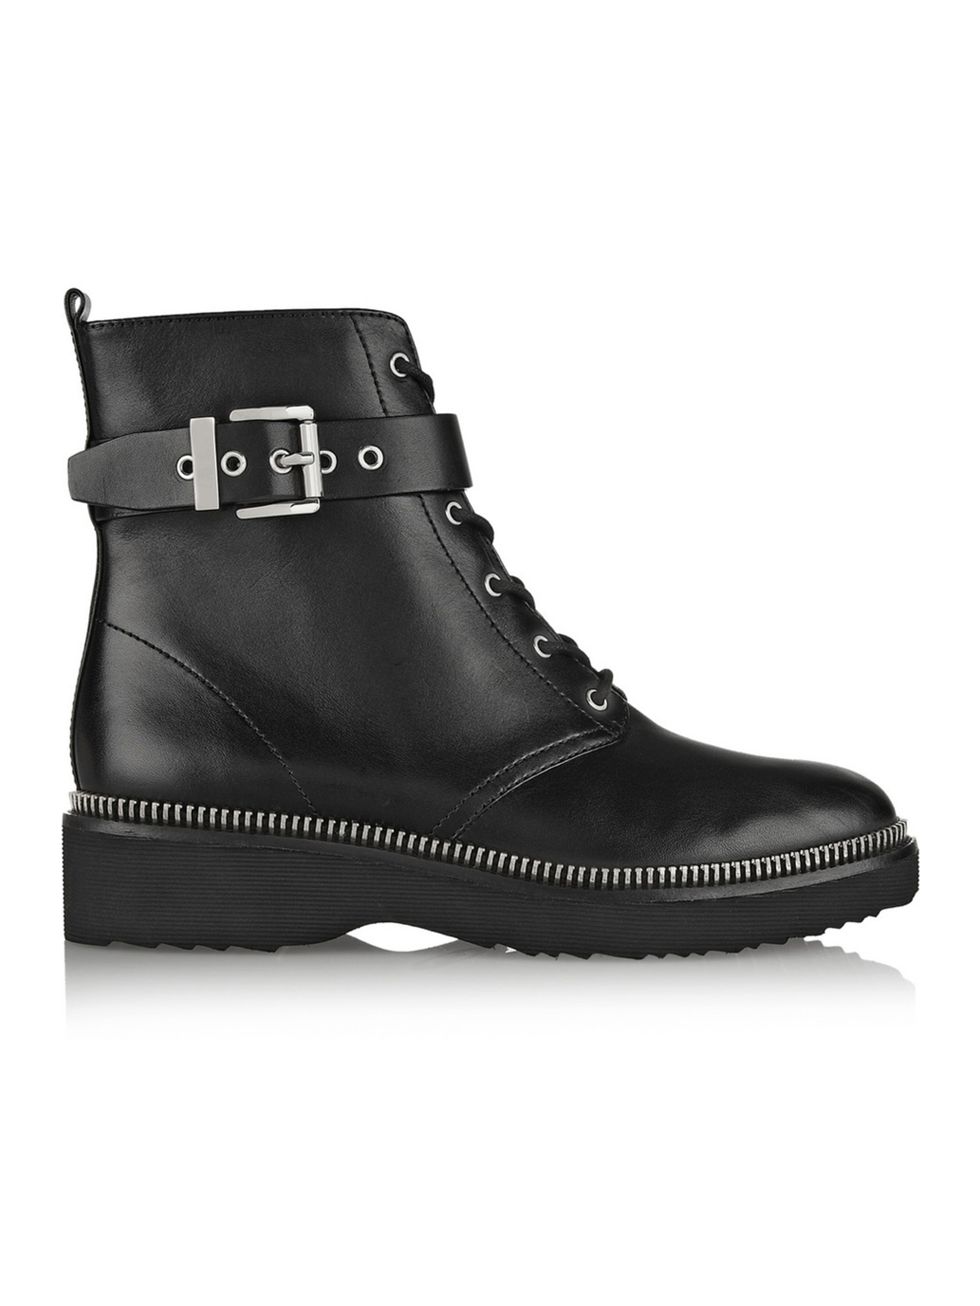 Footwear, Brown, Product, Shoe, Boot, White, Fashion, Black, Leather, Grey, 